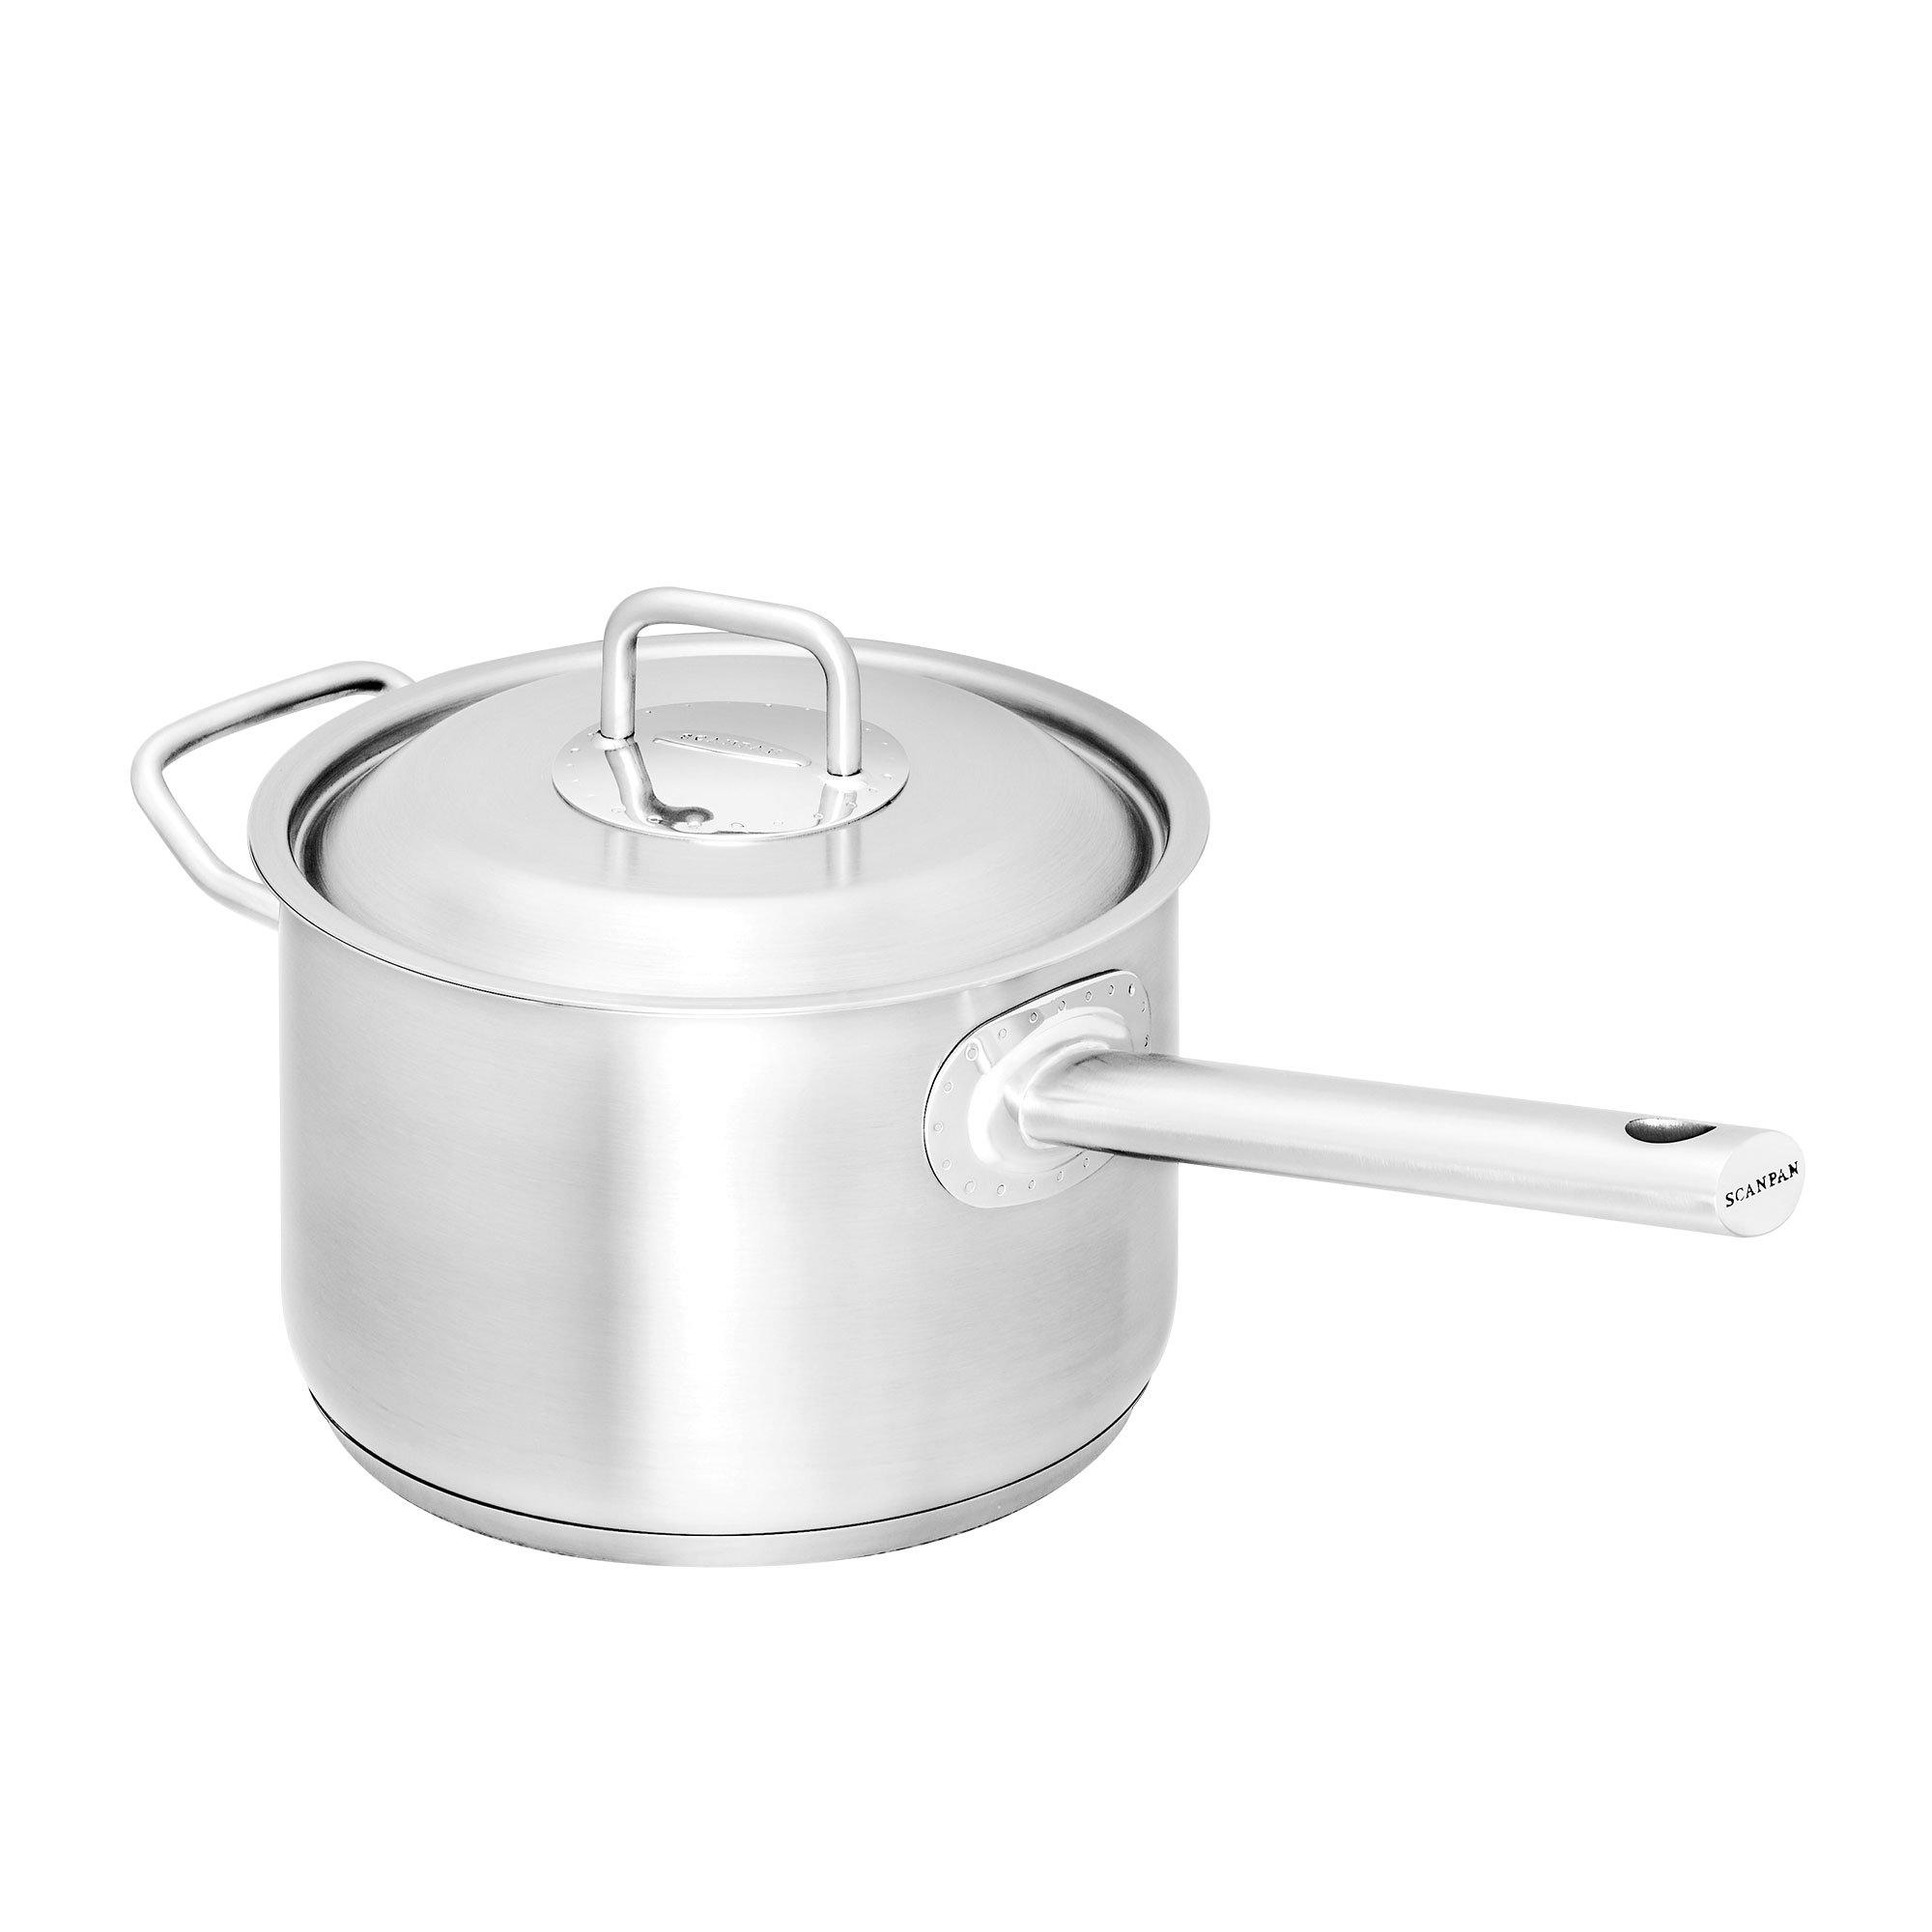 Scanpan Commercial 3pc Stainless Steel Saucepan Set Image 4